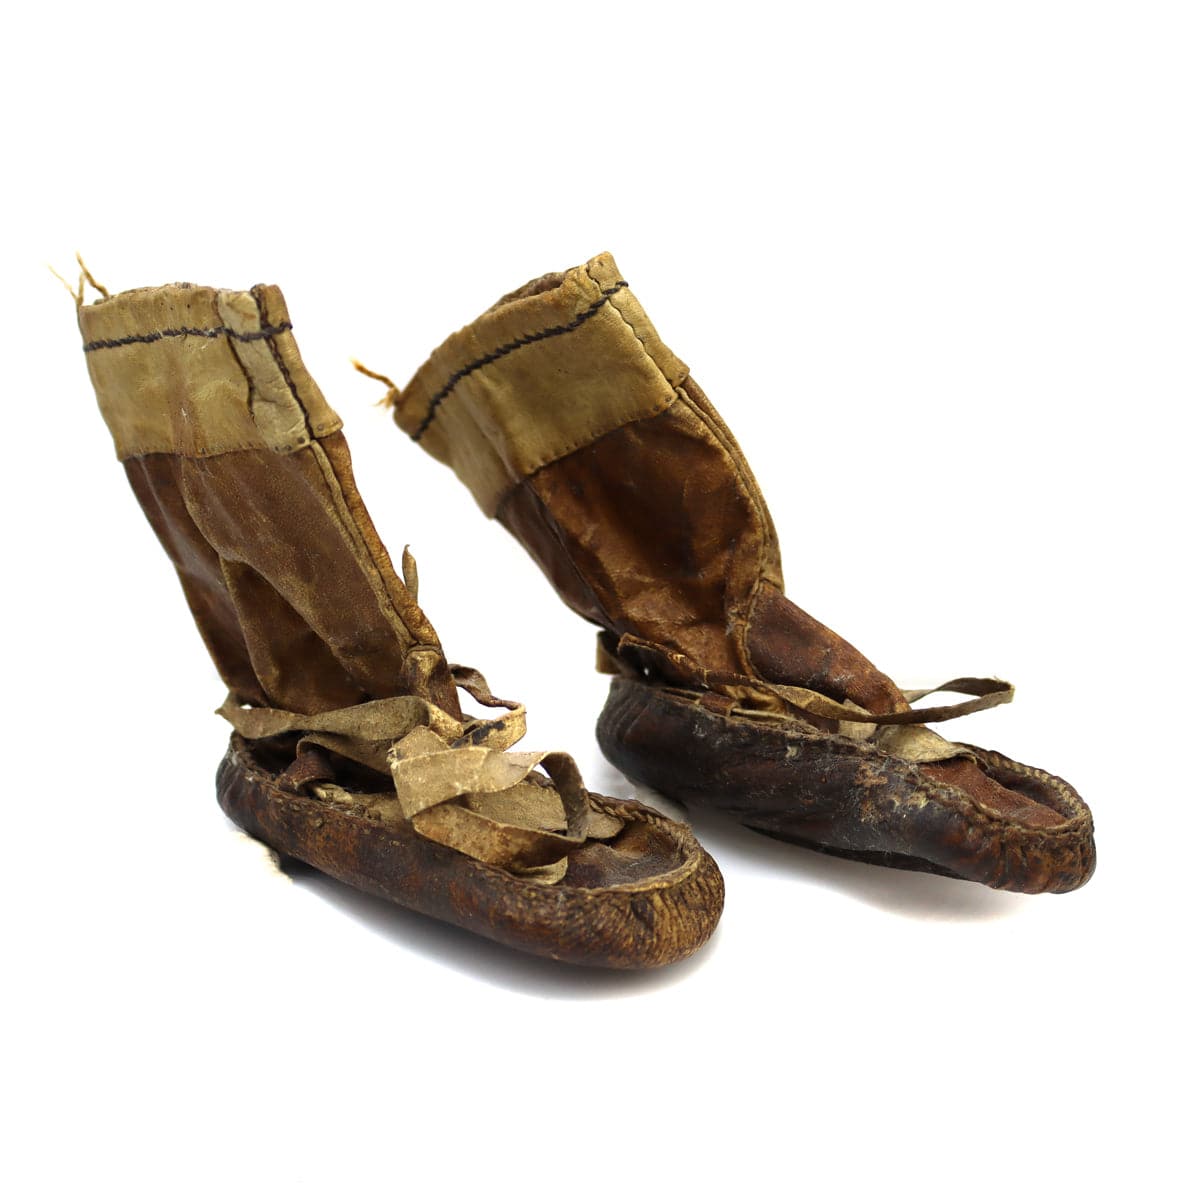 Alaskan Child's Leather Moccasins and Leather and Wooden Drum c. 1900s (M1763) 19
